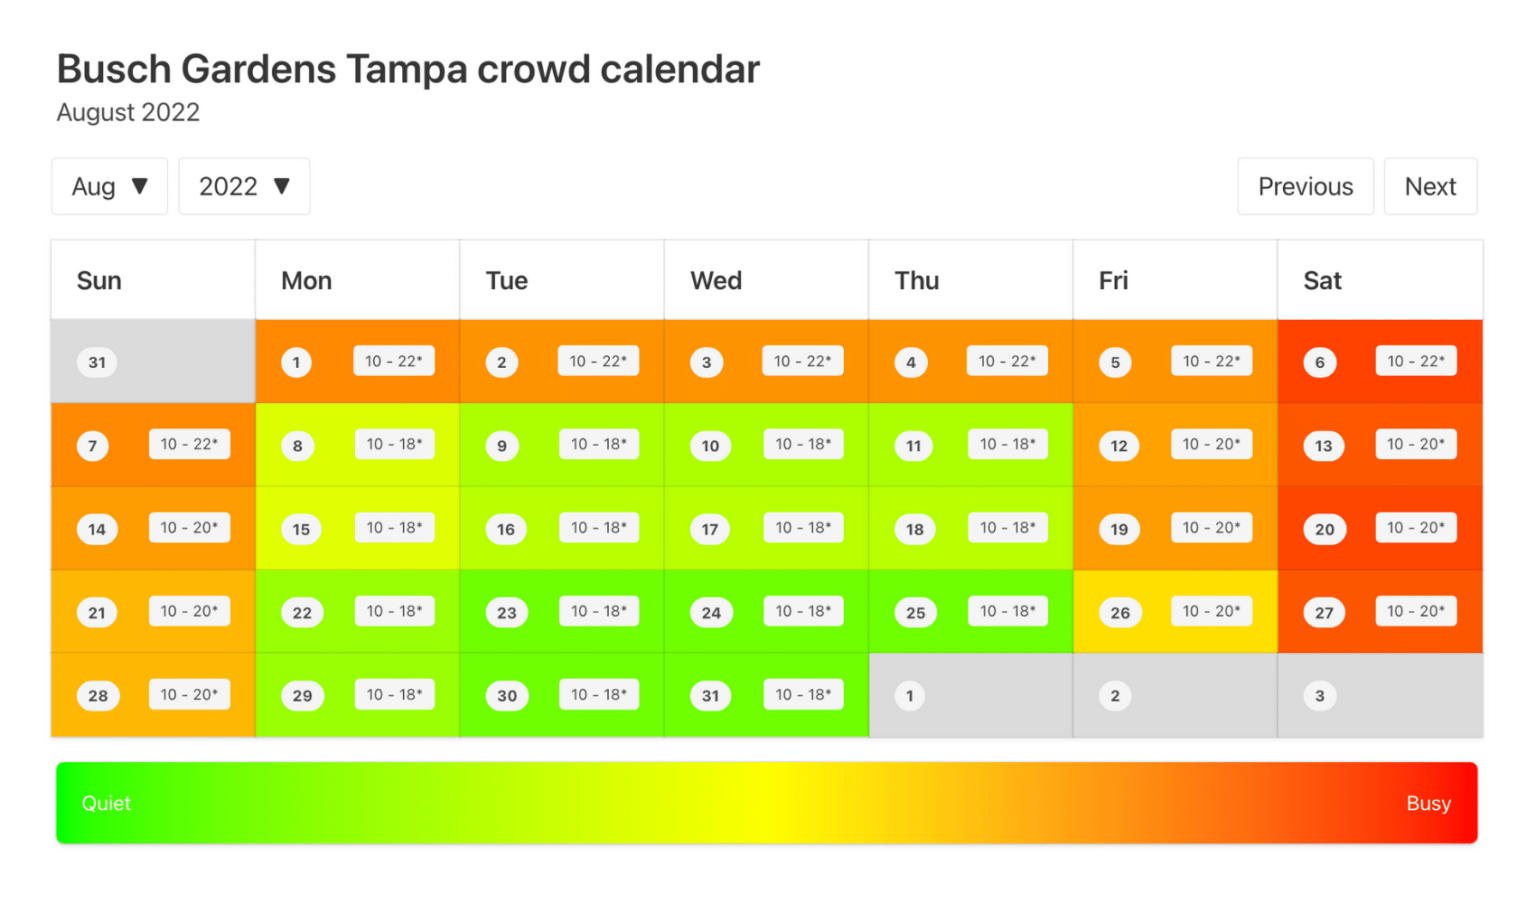 Busch Gardens Tampa Crowd Calendar AVOID THE BUSY DAYS ThemeParkHipster